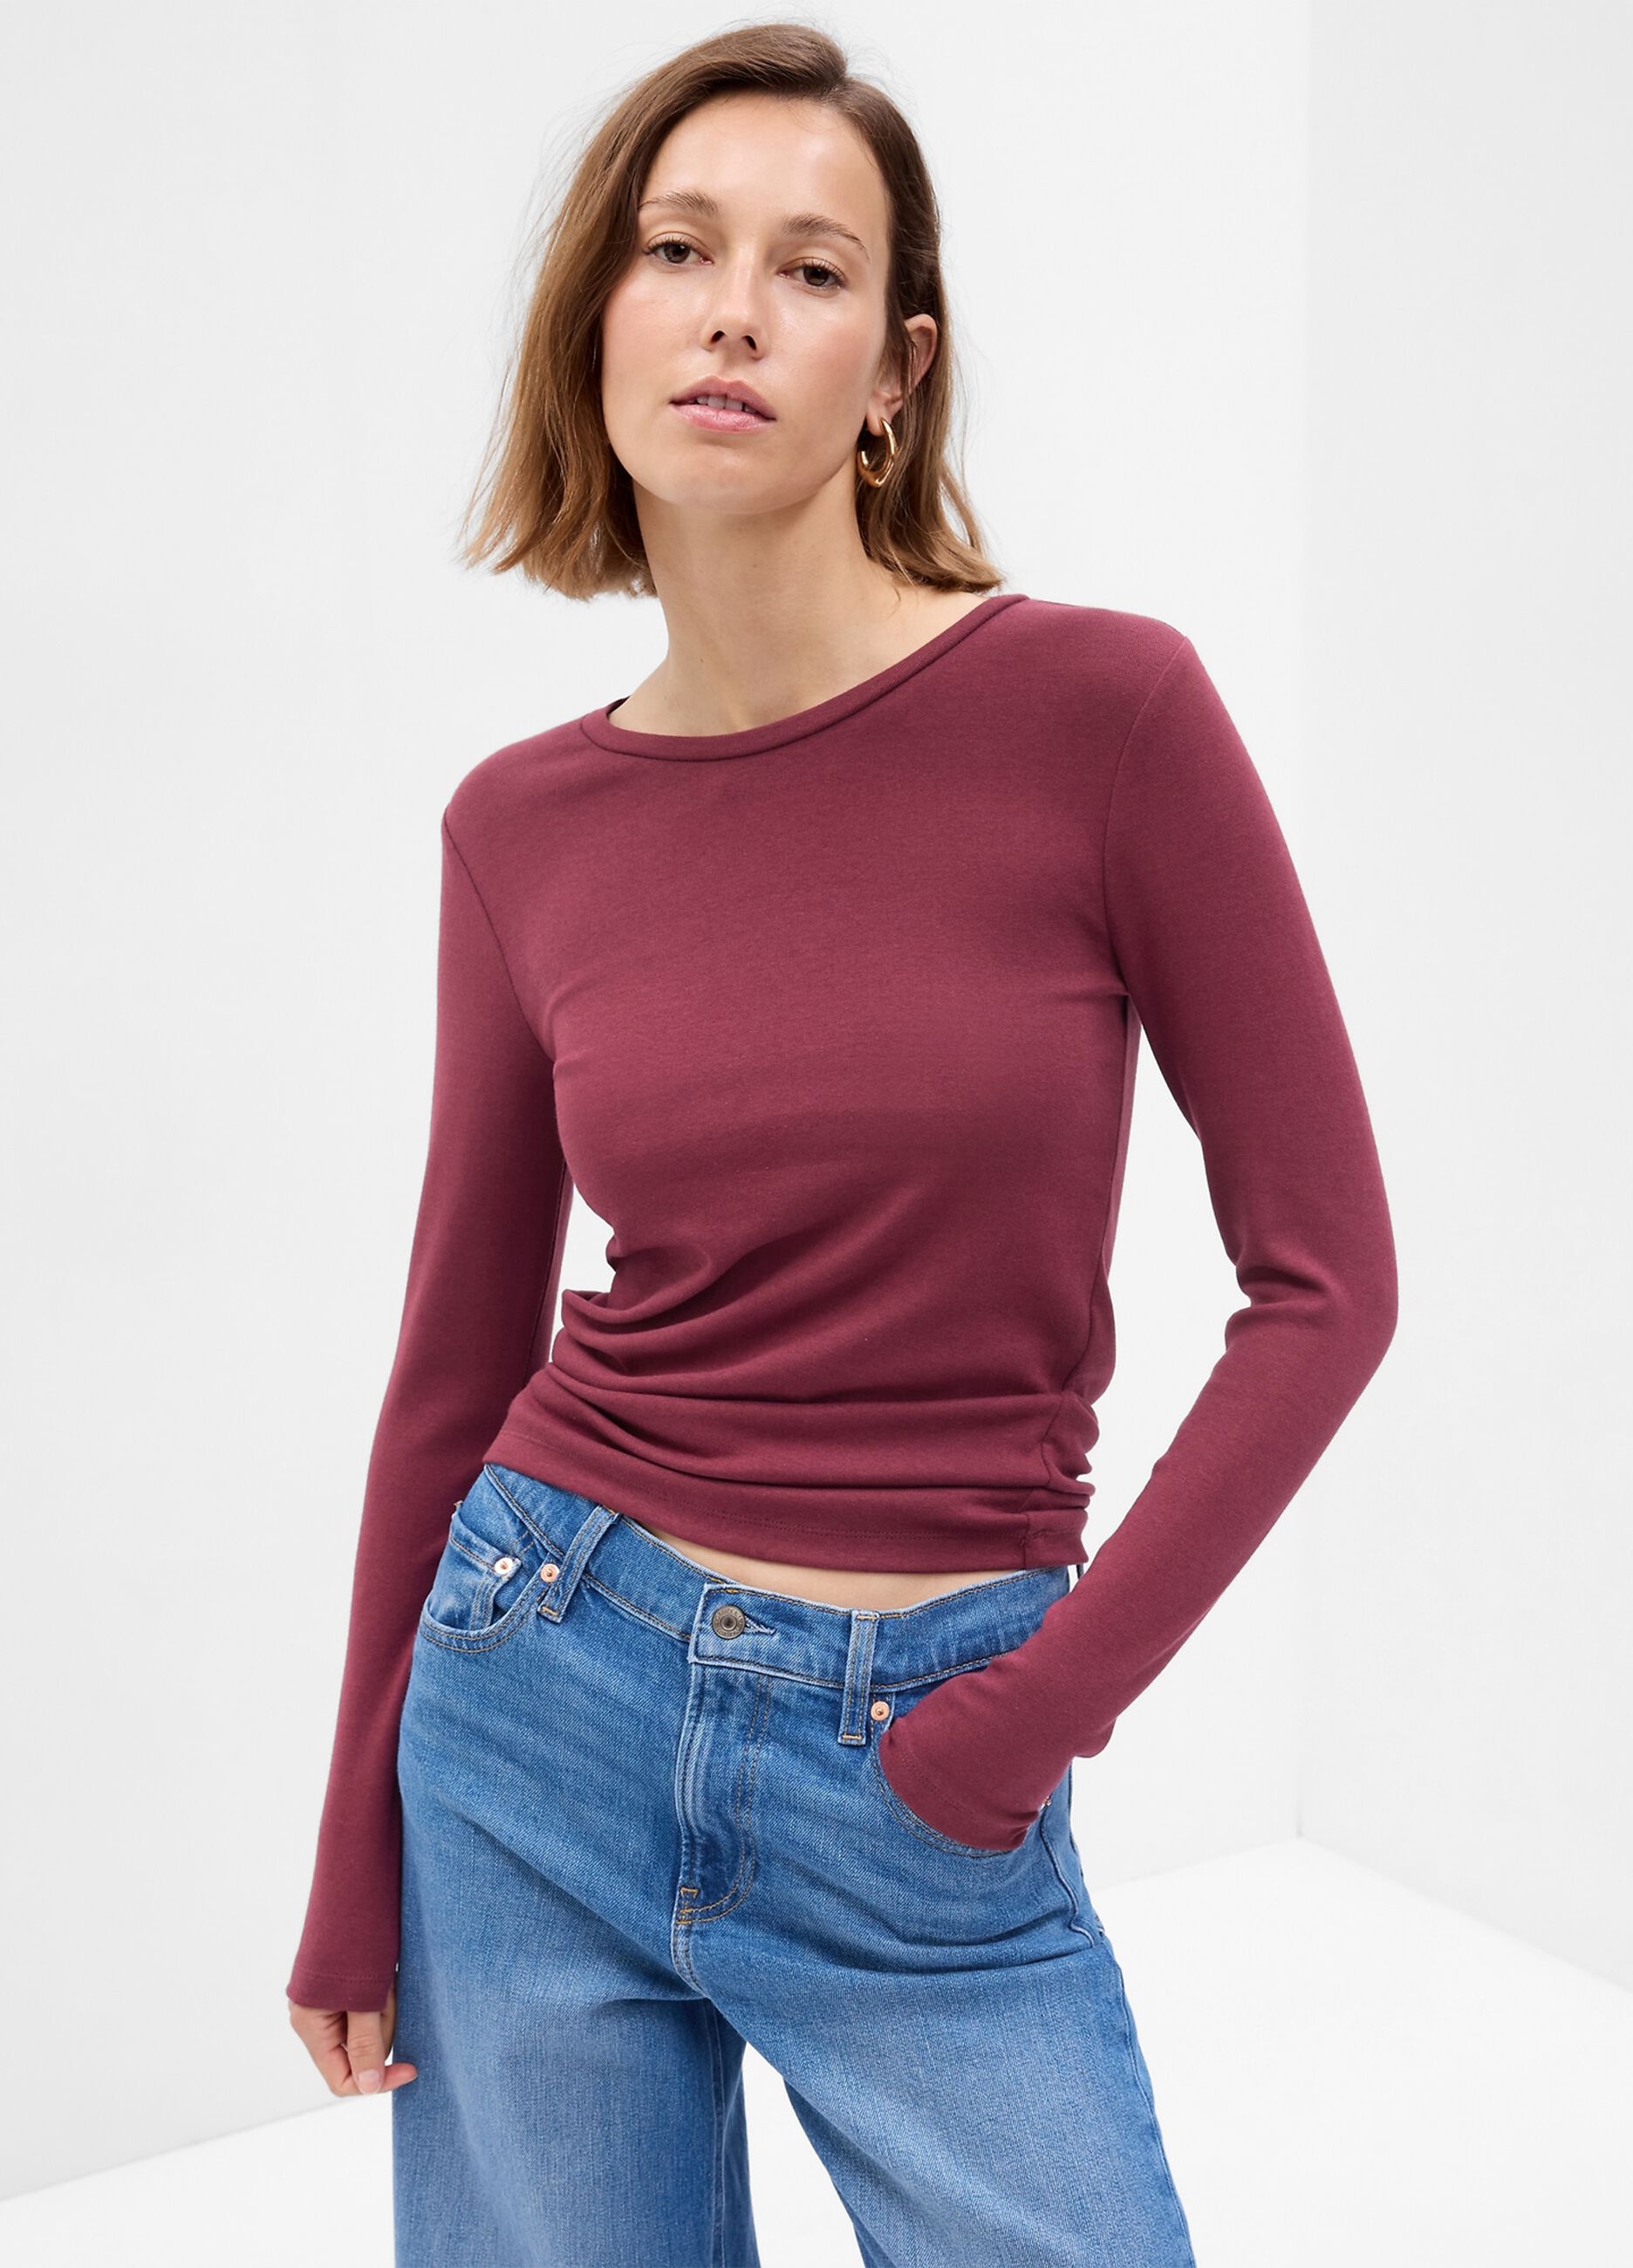 Long-sleeved T-shirt in cotton and modal